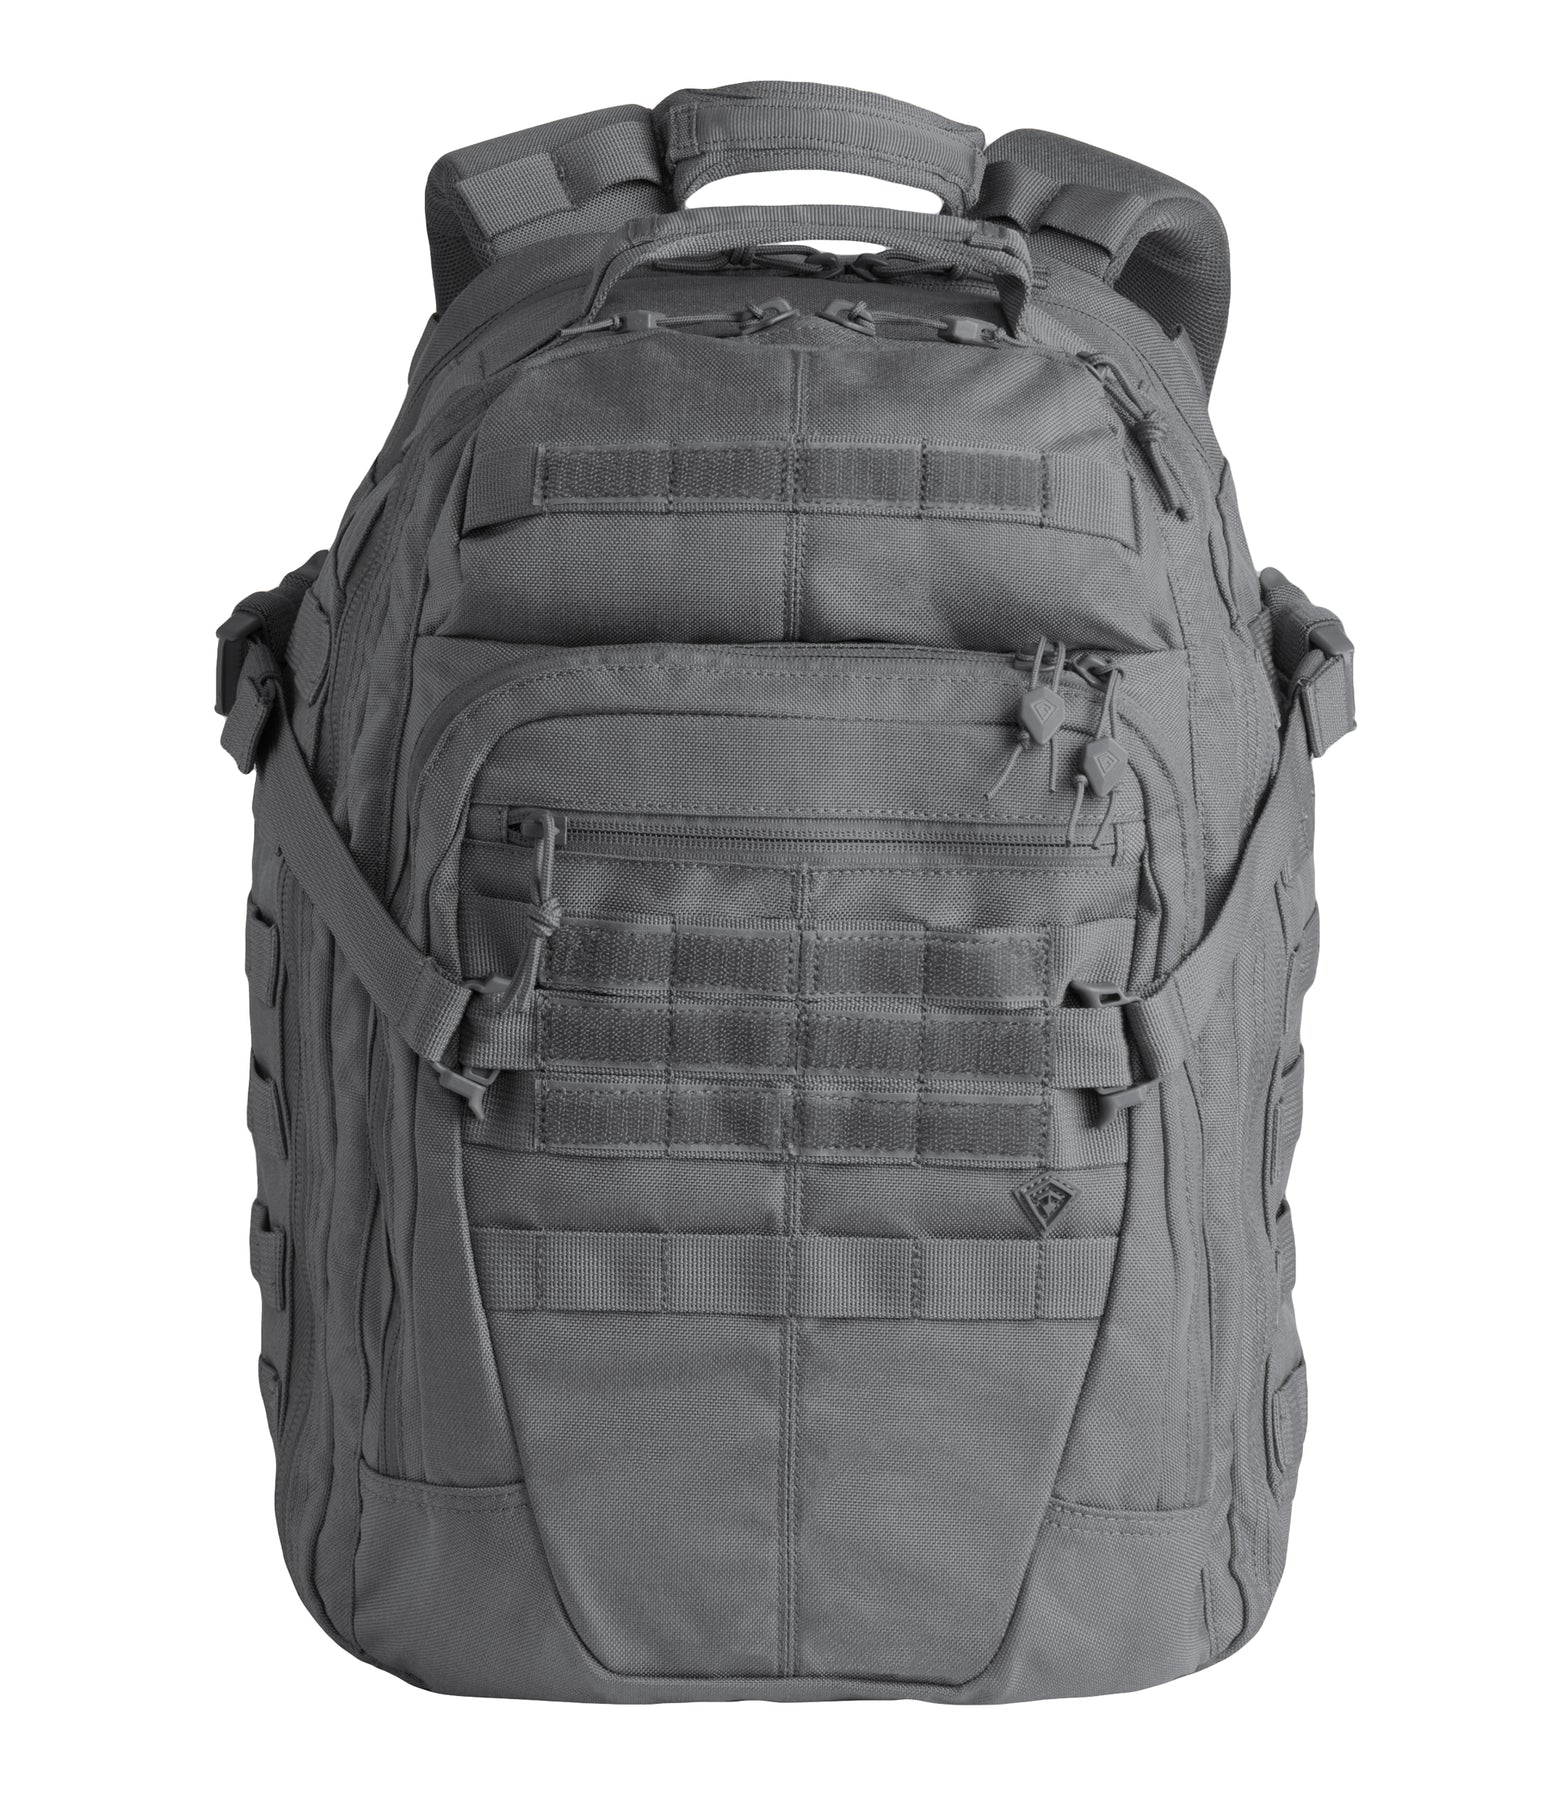 First Tactical Specialist BackPack 1 Day 36L 180005 - Range Bags and Gun Cases